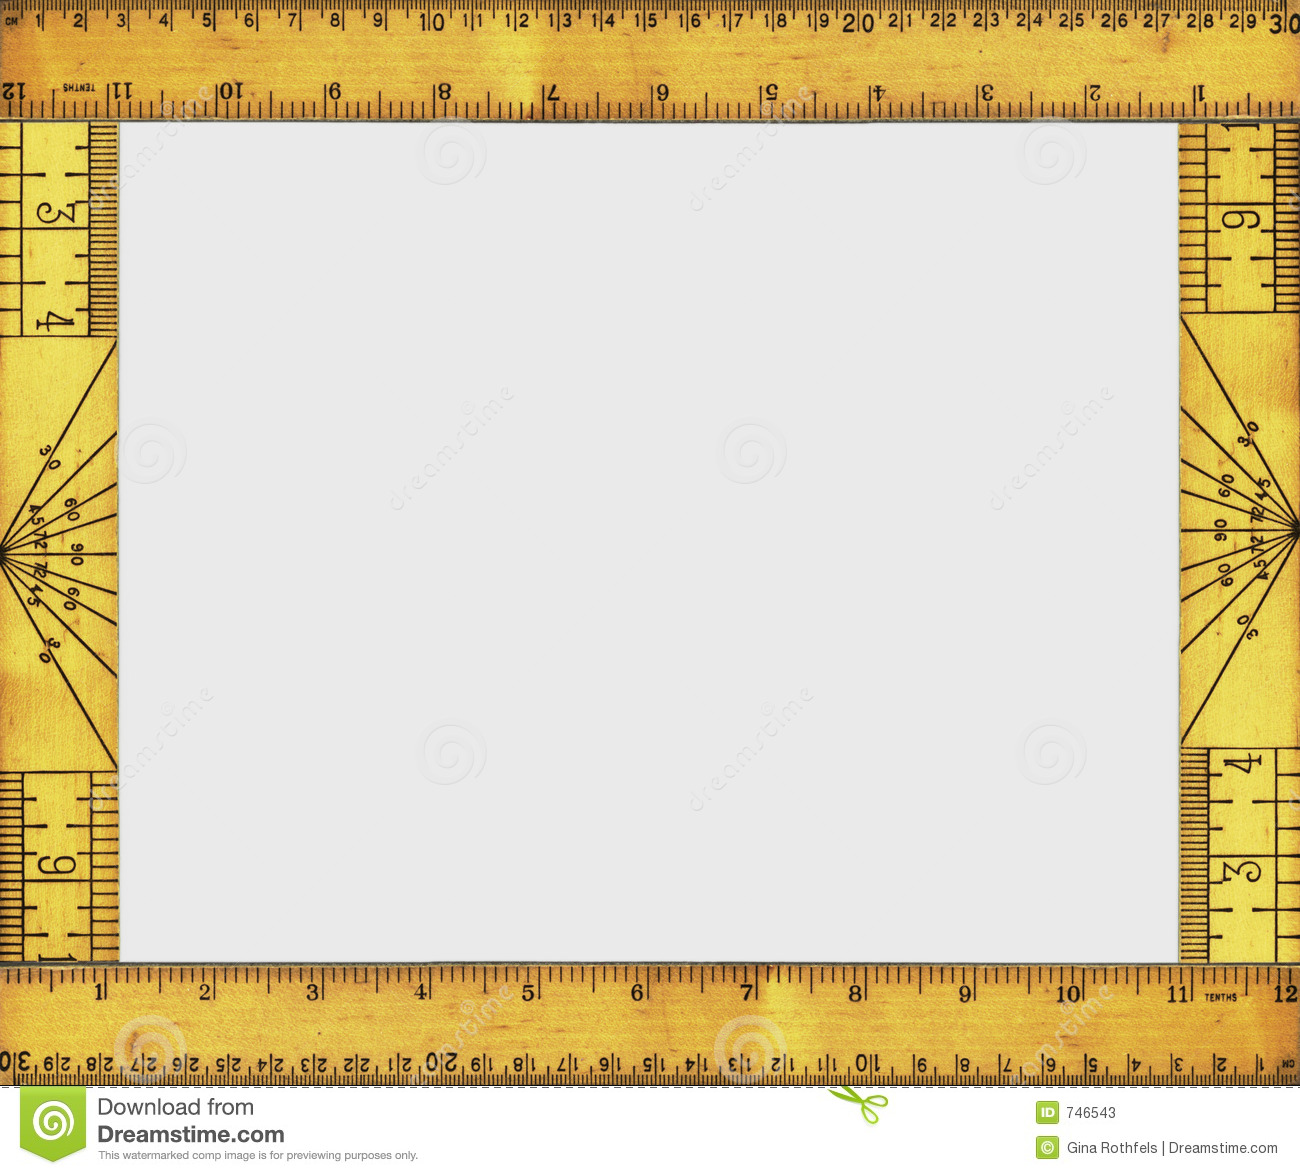 Frame Made Up Of The Back And Front Views Of A Vintage Wooden Ruler 